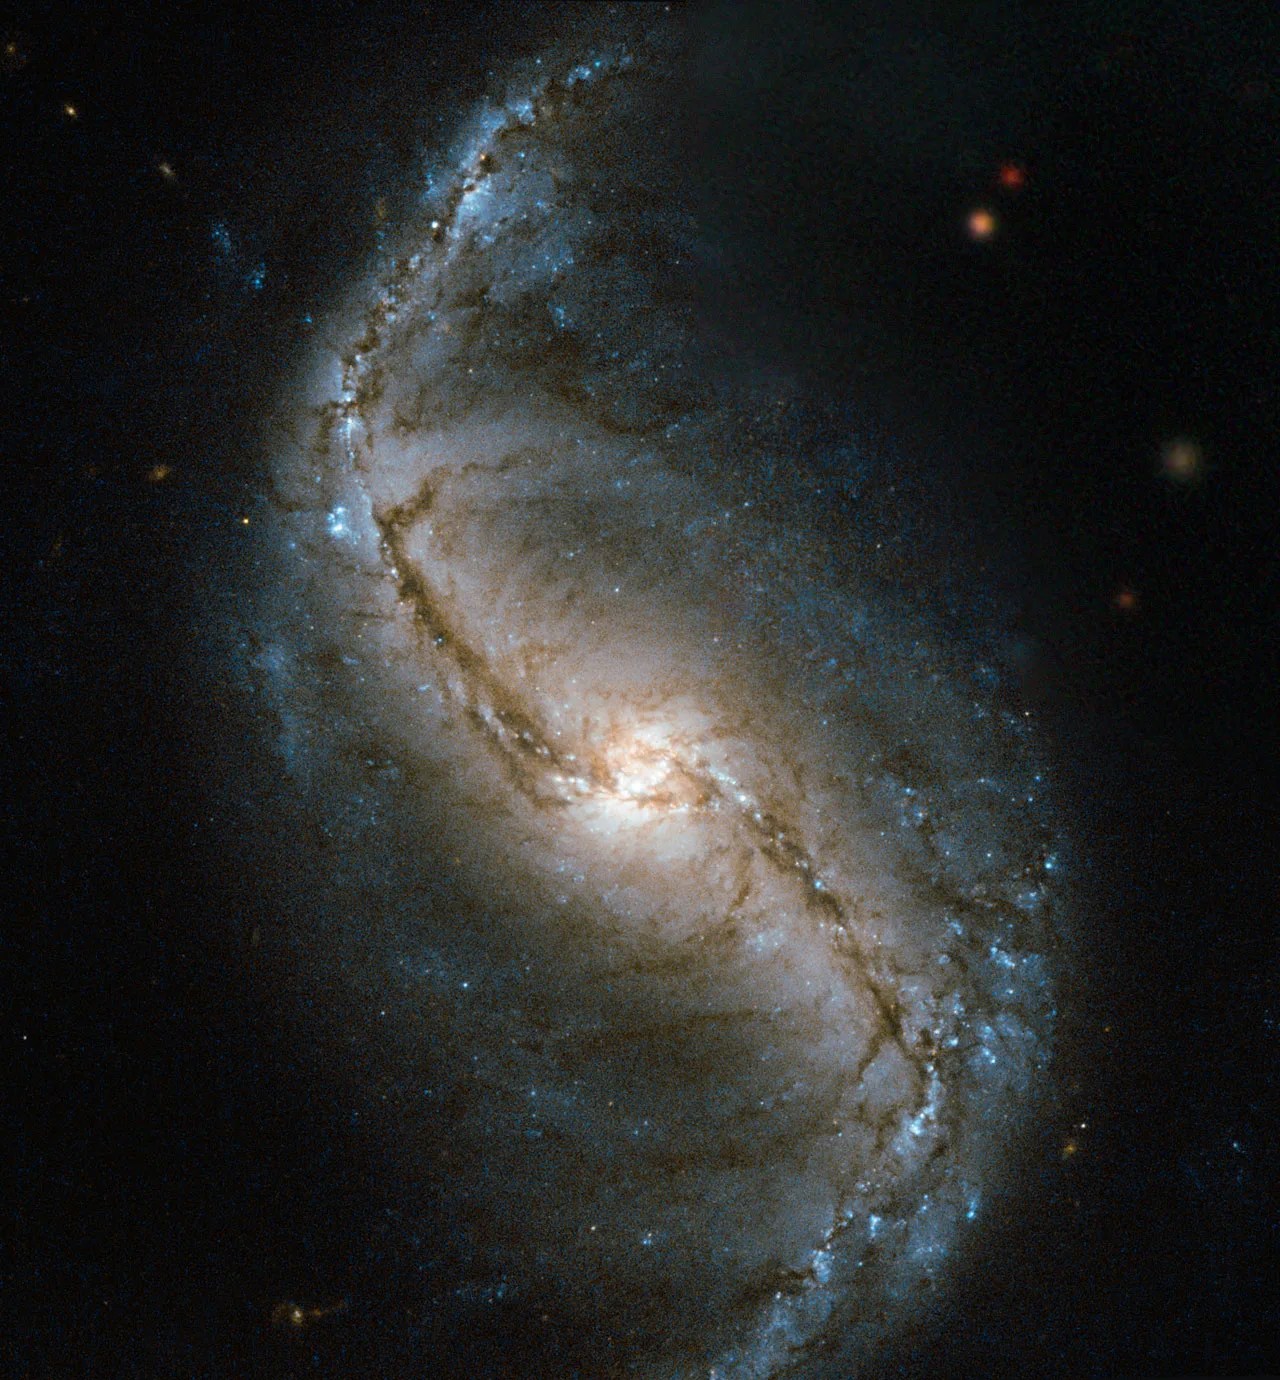 Galaxy with golden center and barred swirling arms